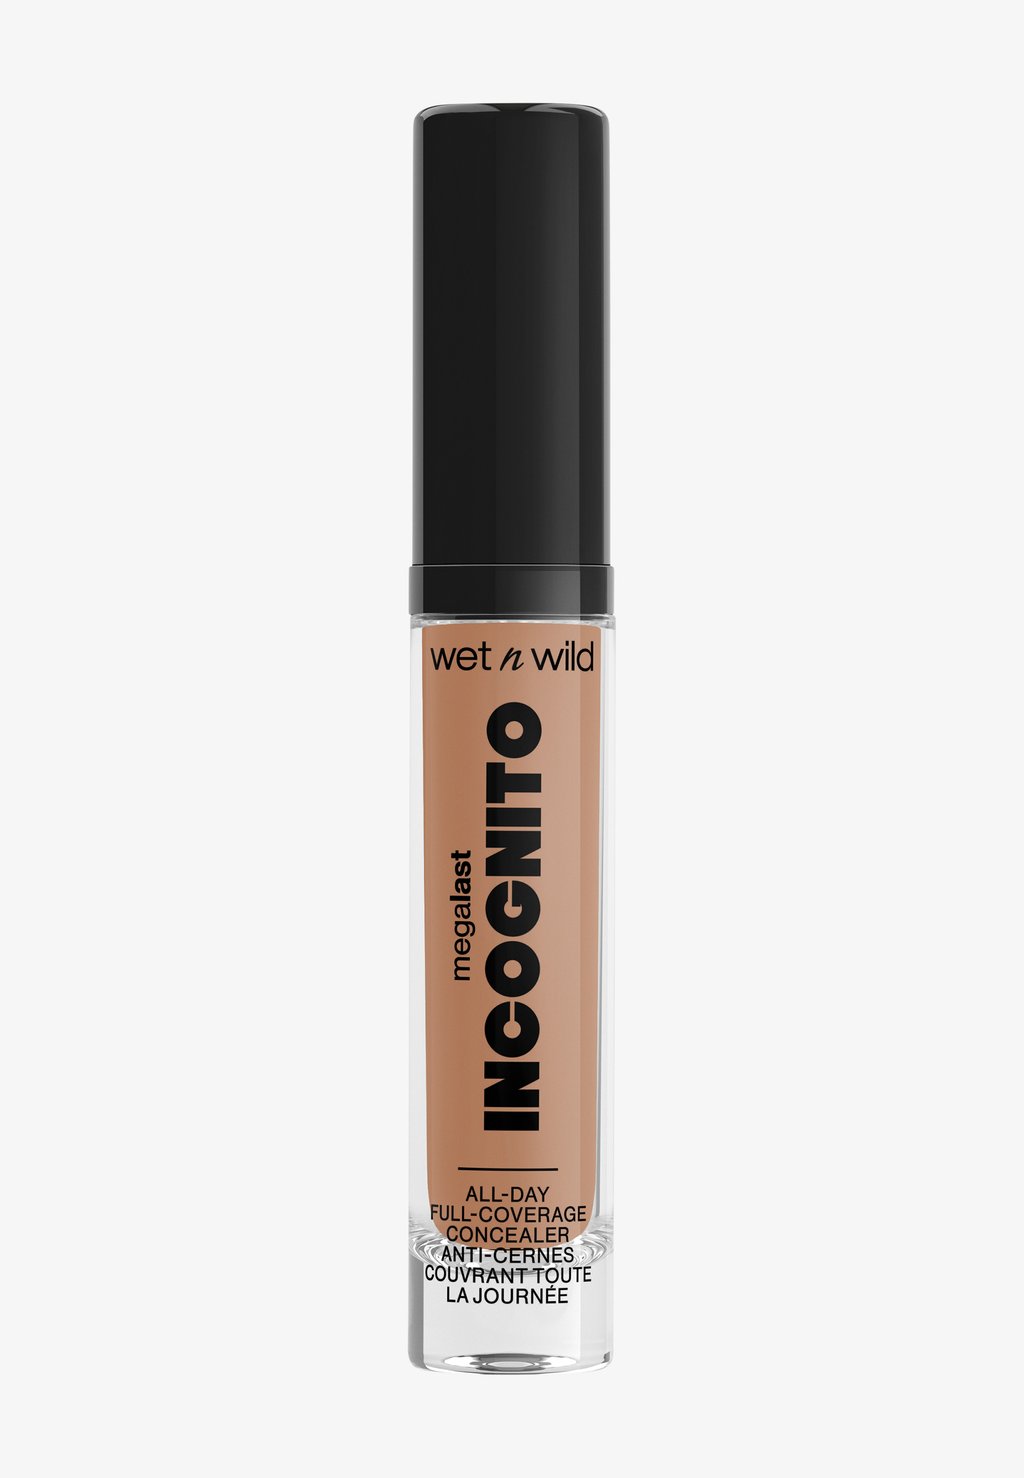 Консилер Megalast Incognito All-Day Full Coverage Concealer WET N WILD, цвет light medium